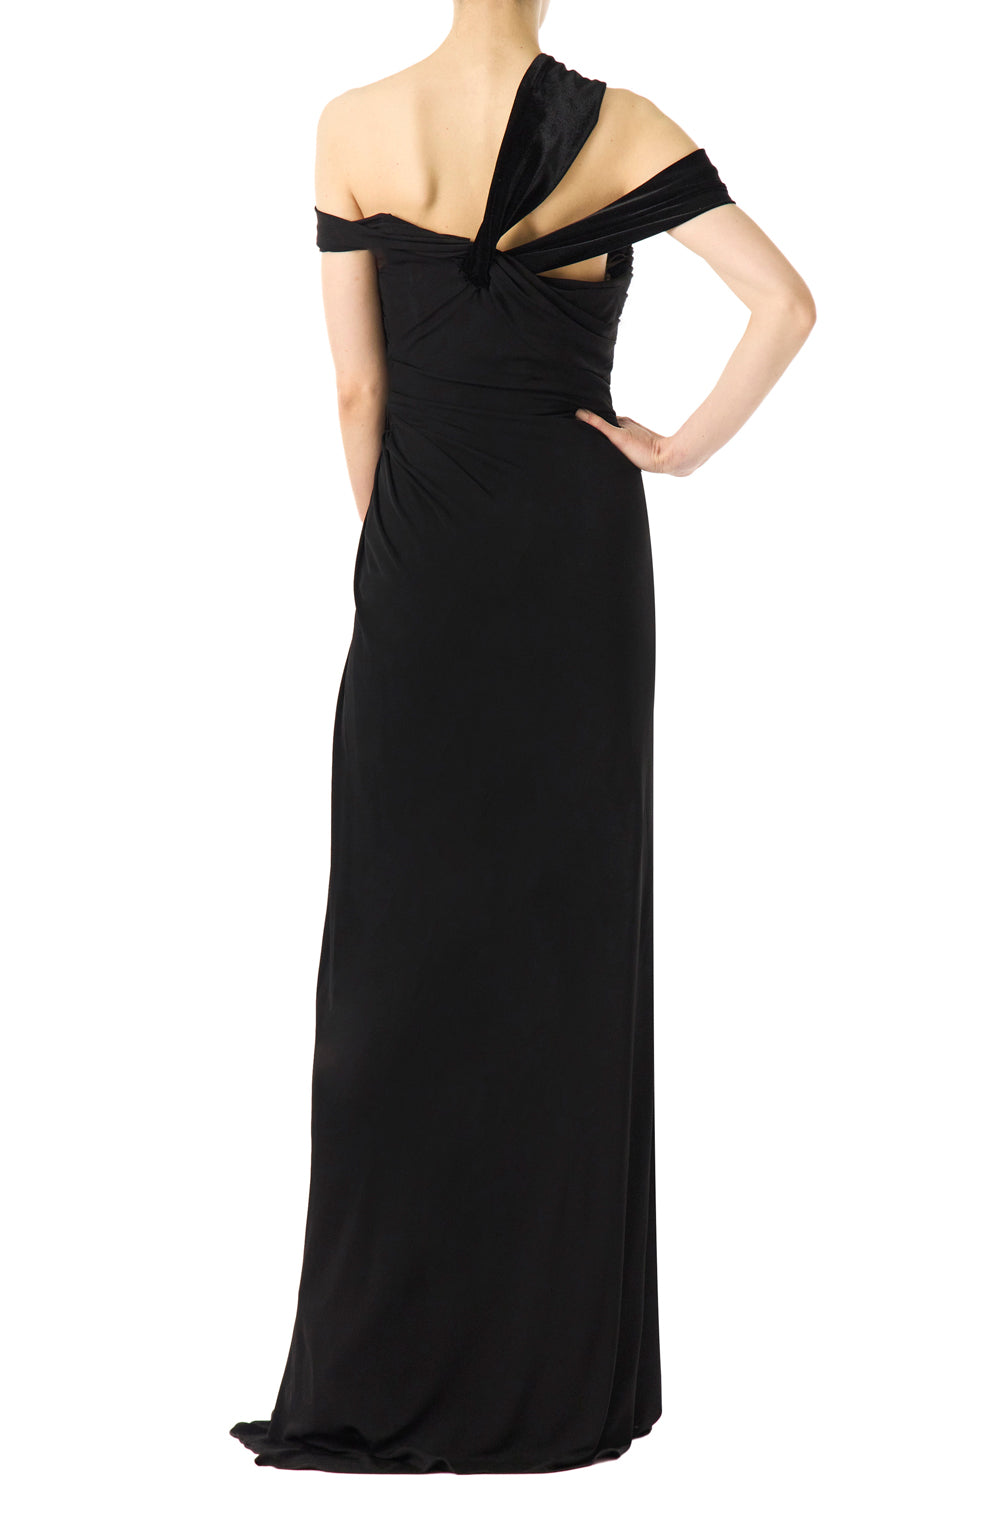 Monique Lhuillier asymmetric neckline gown in black jersey and velvet with draped bodice and front slit.